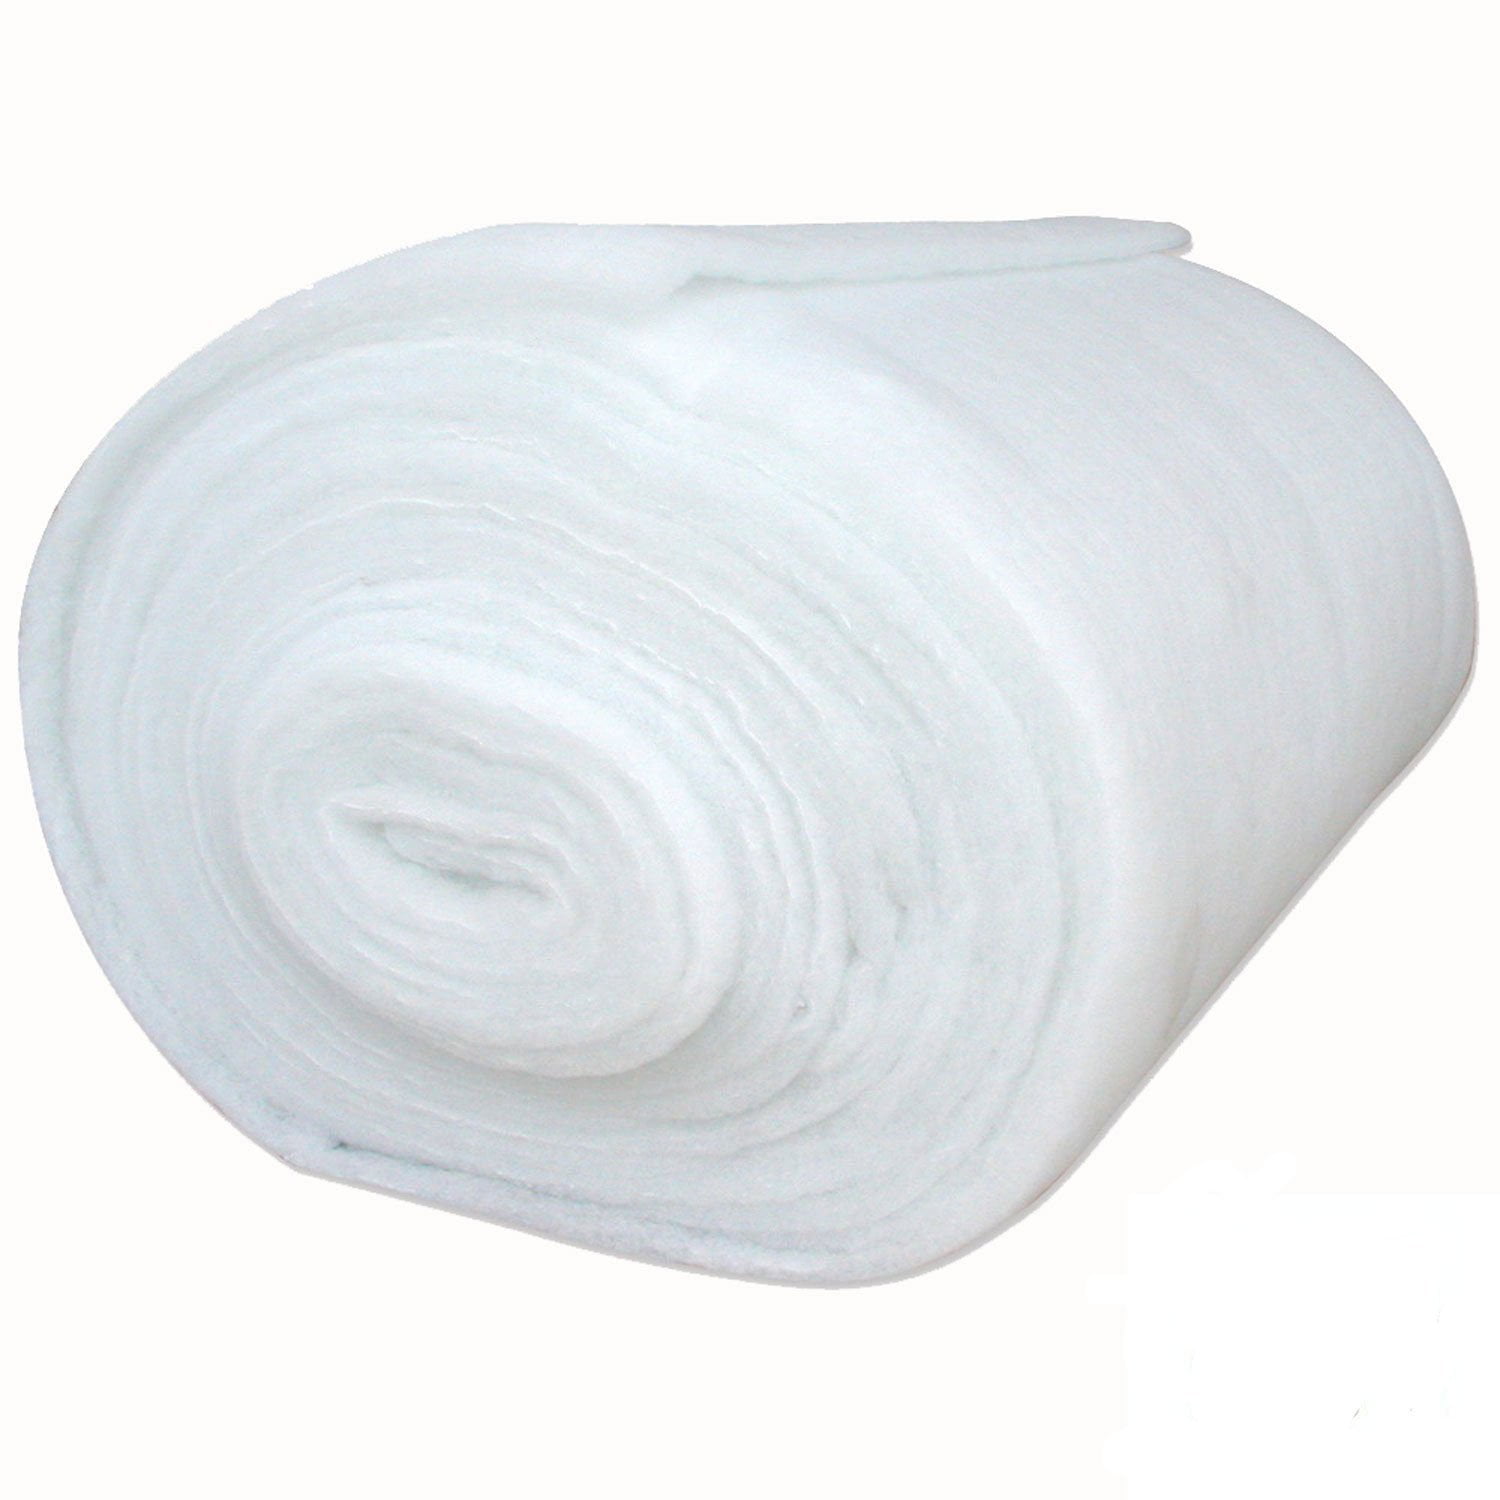 AK TRADING CO. Foam Padding 56 Wide x 1/4 Inch Thick - 2 Yards 1